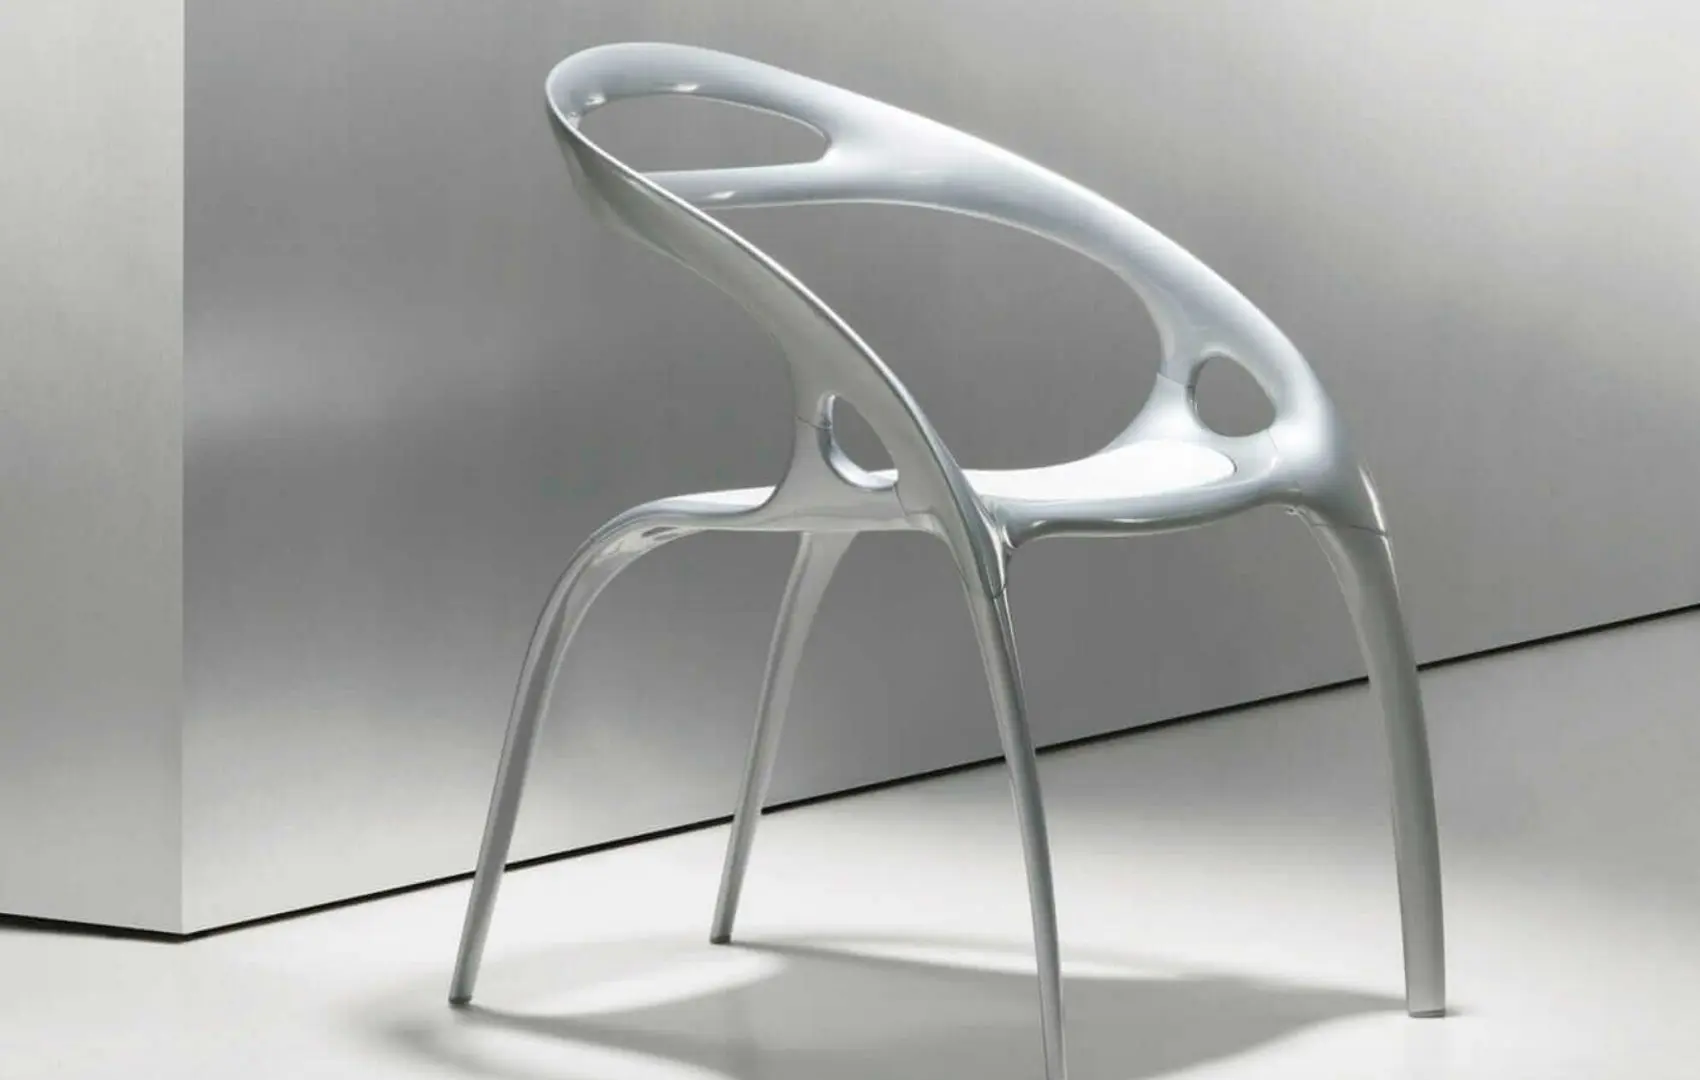 Go Chair - 10 iconic designs by Ross Lovegrove